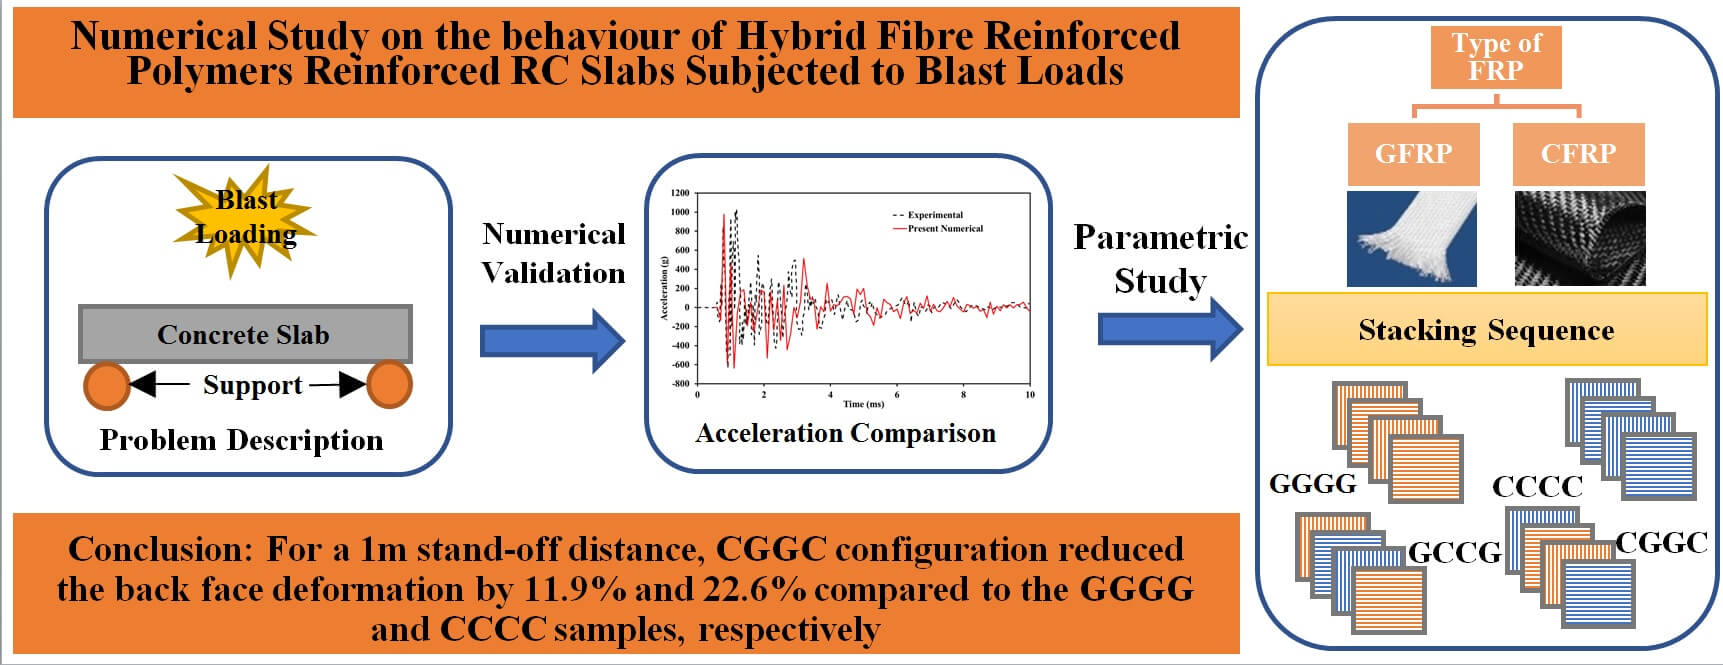 Numerical Study on the Behaviour of Hybrid FRPs Reinforced RC Slabs Subjected to Blast Loads